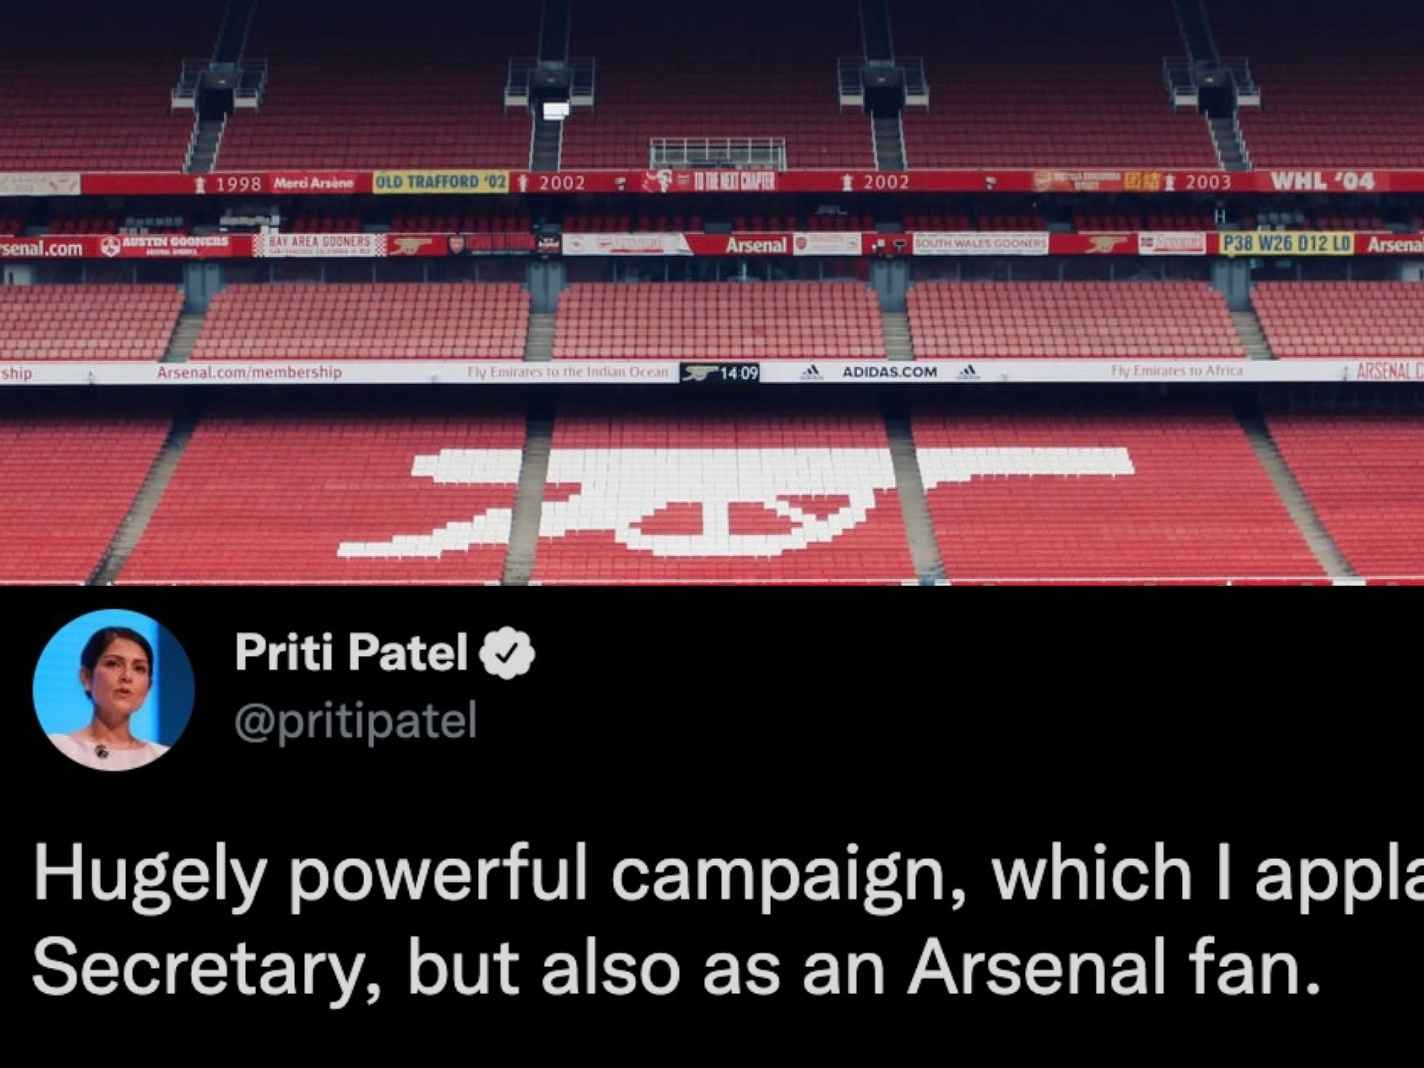 Twitter reacts to Priti Patel announcing herself as an Arsenal fan